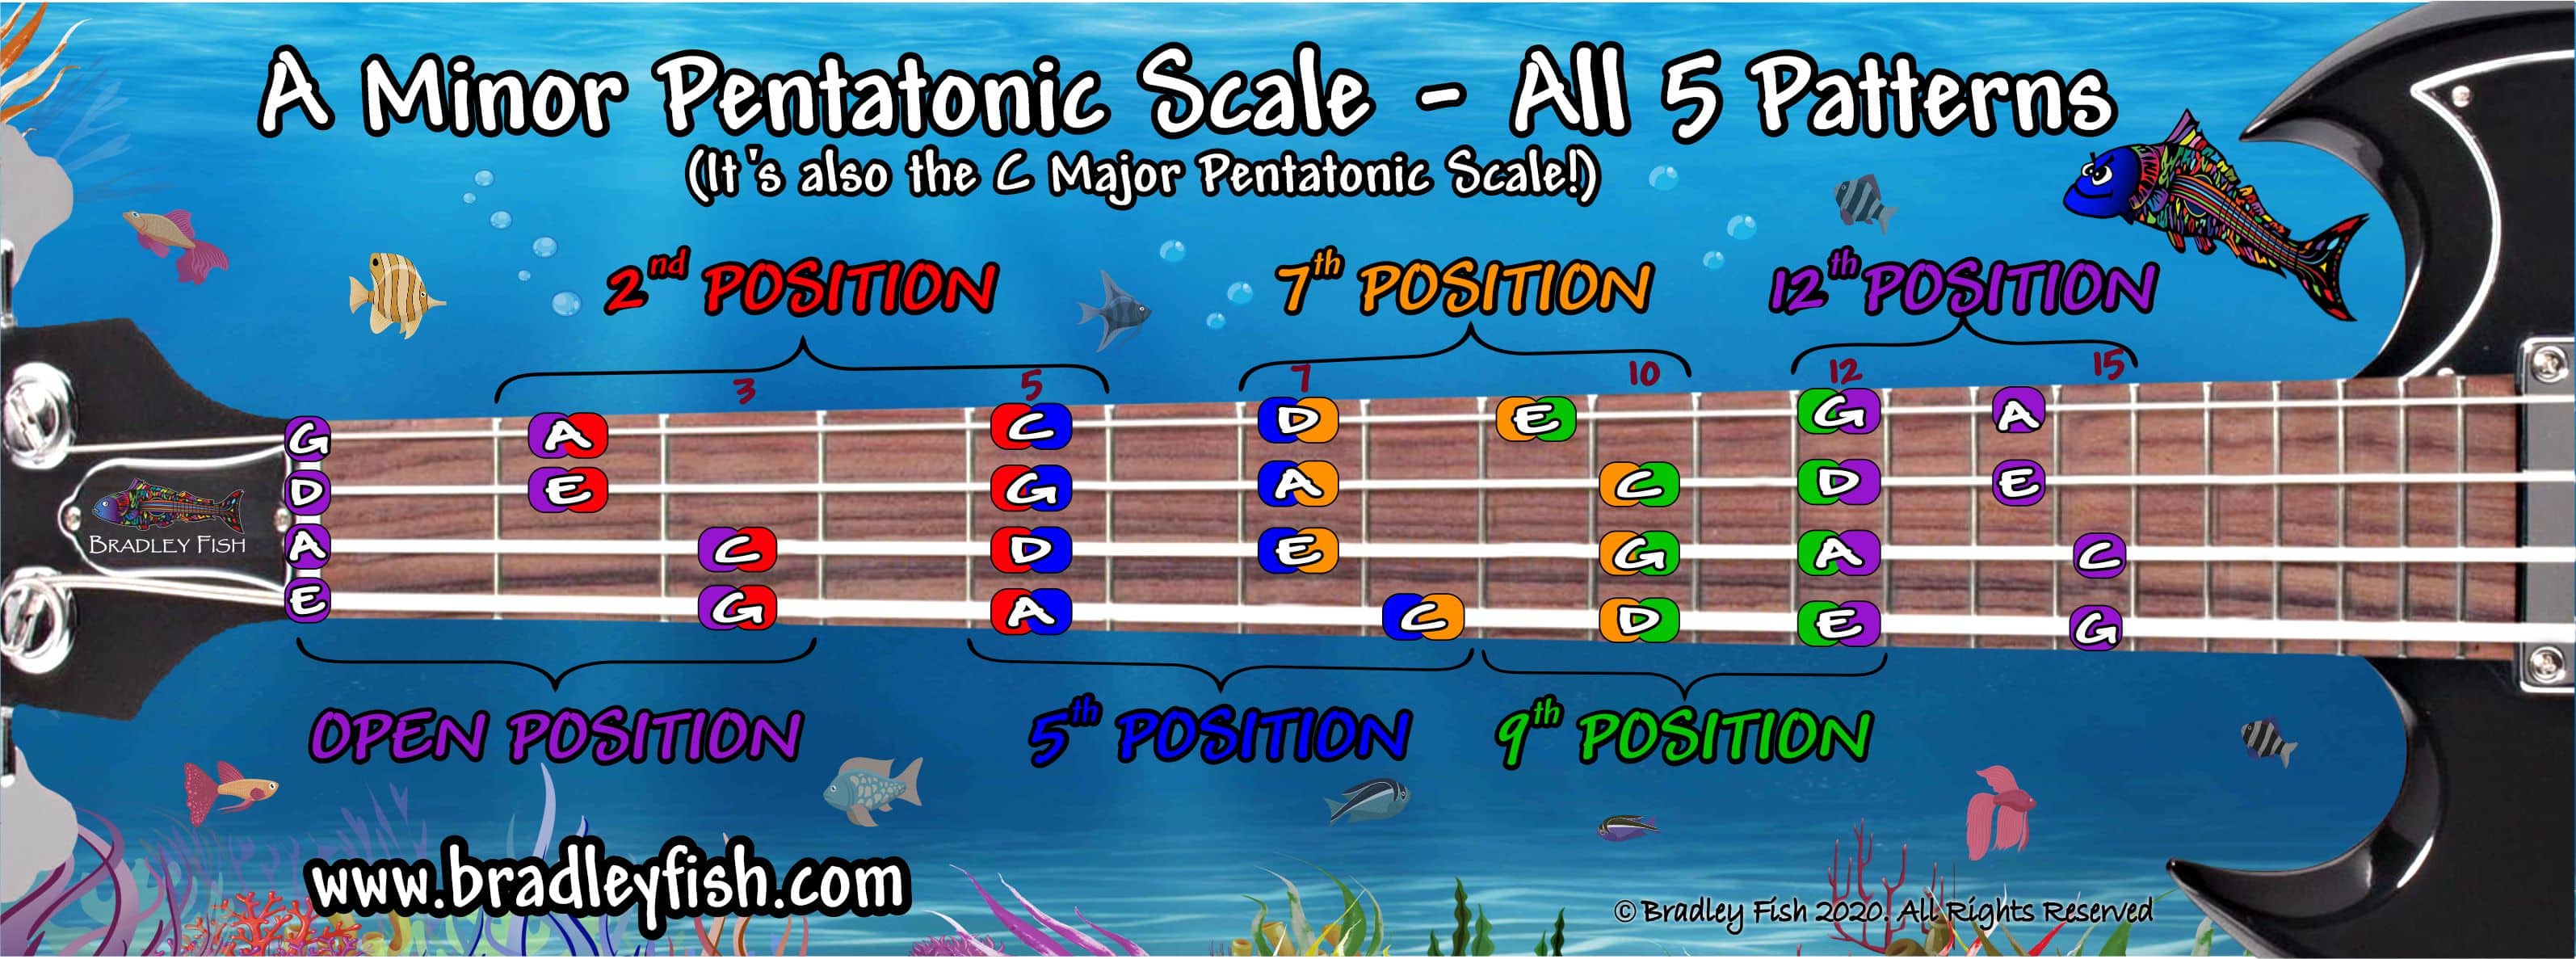 A Minor Pentatonic Scale - All 5 patterns for the whole Bass Guitar -  Newer, Prettier, Fishier!!! - Bradley Fish